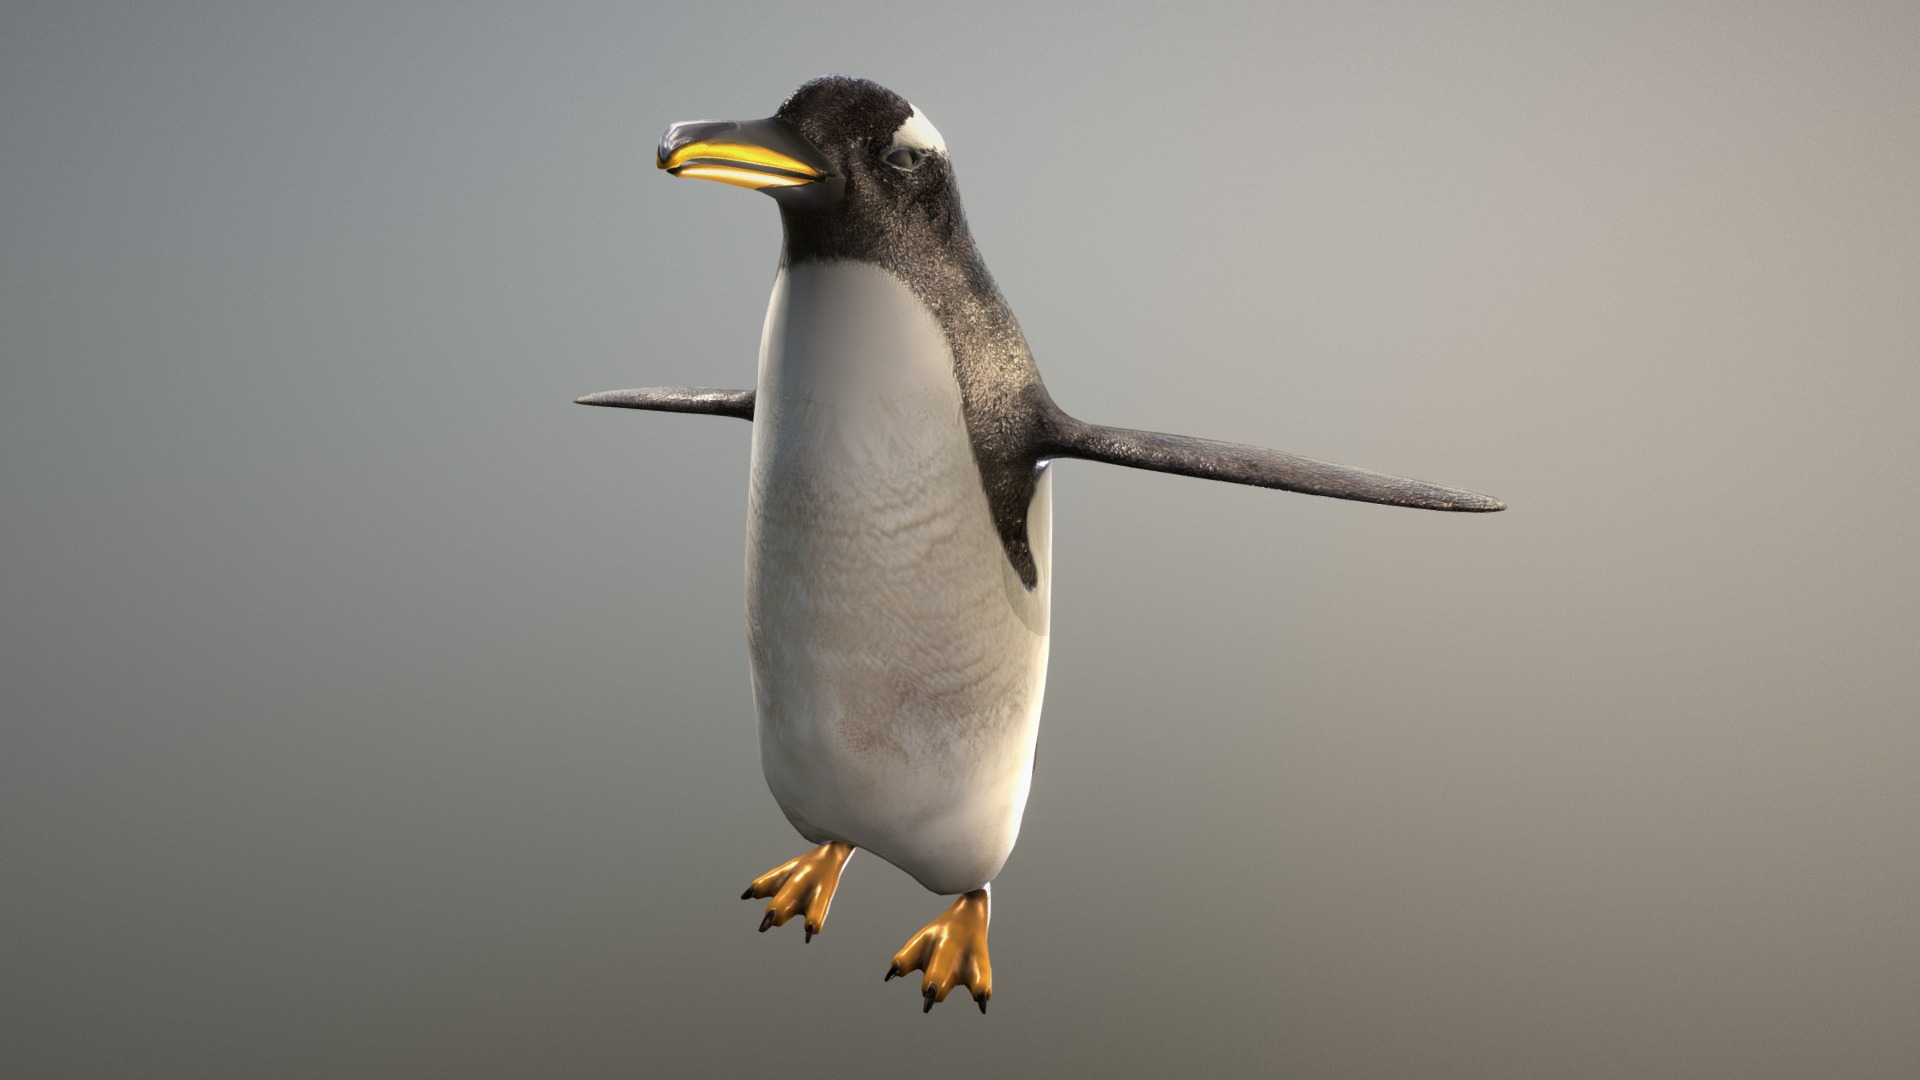 3D model Gentoo Penguin zoo - This is a 3D model of the Gentoo Penguin zoo. The 3D model is about a penguin with a yellow beak.